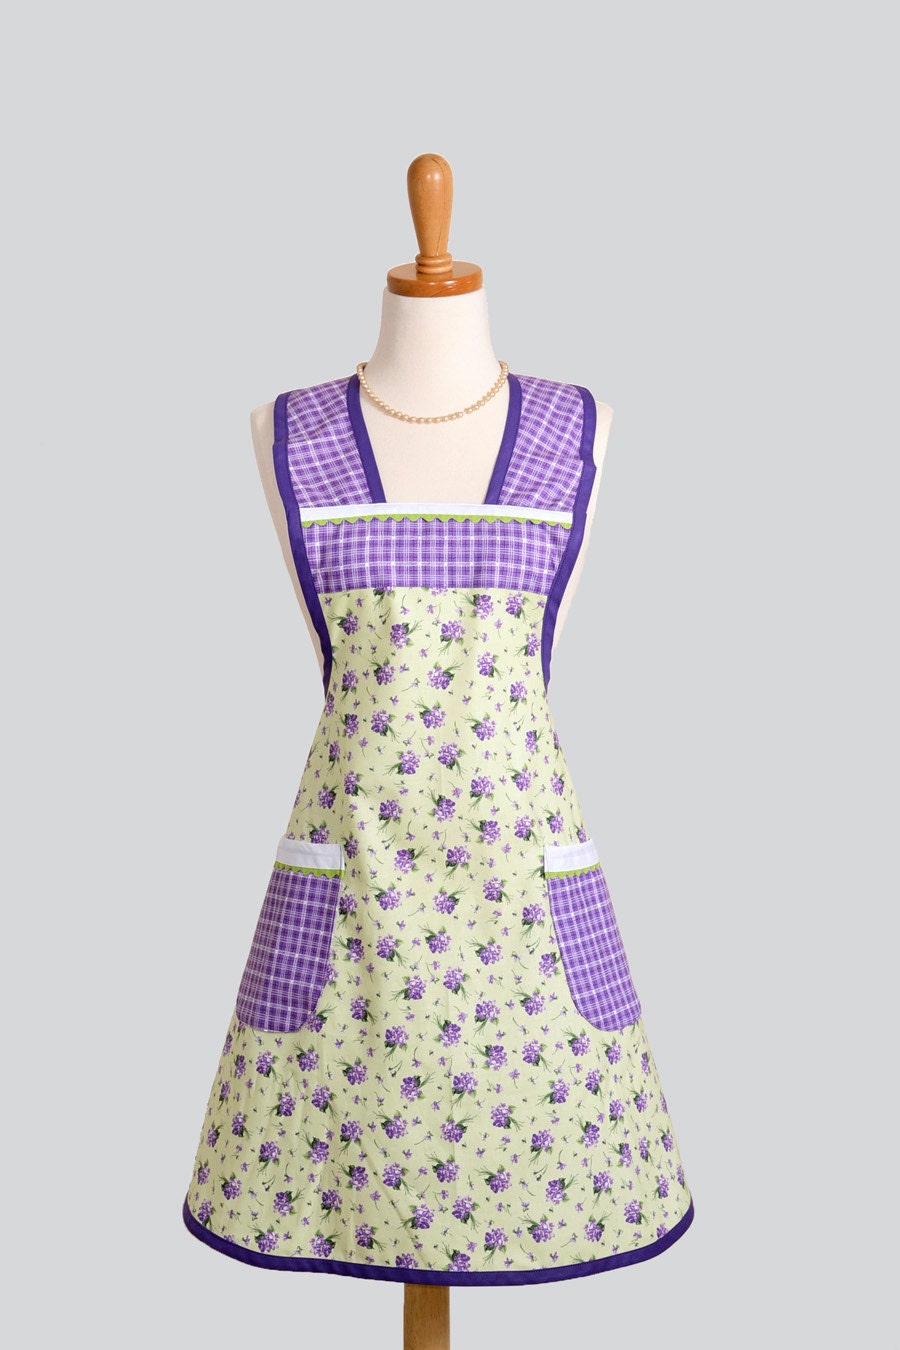 Womens Vintage Inspired Apron / Purple Flower Bouquet on Lime Green Trimmed in Purple and White Plaid